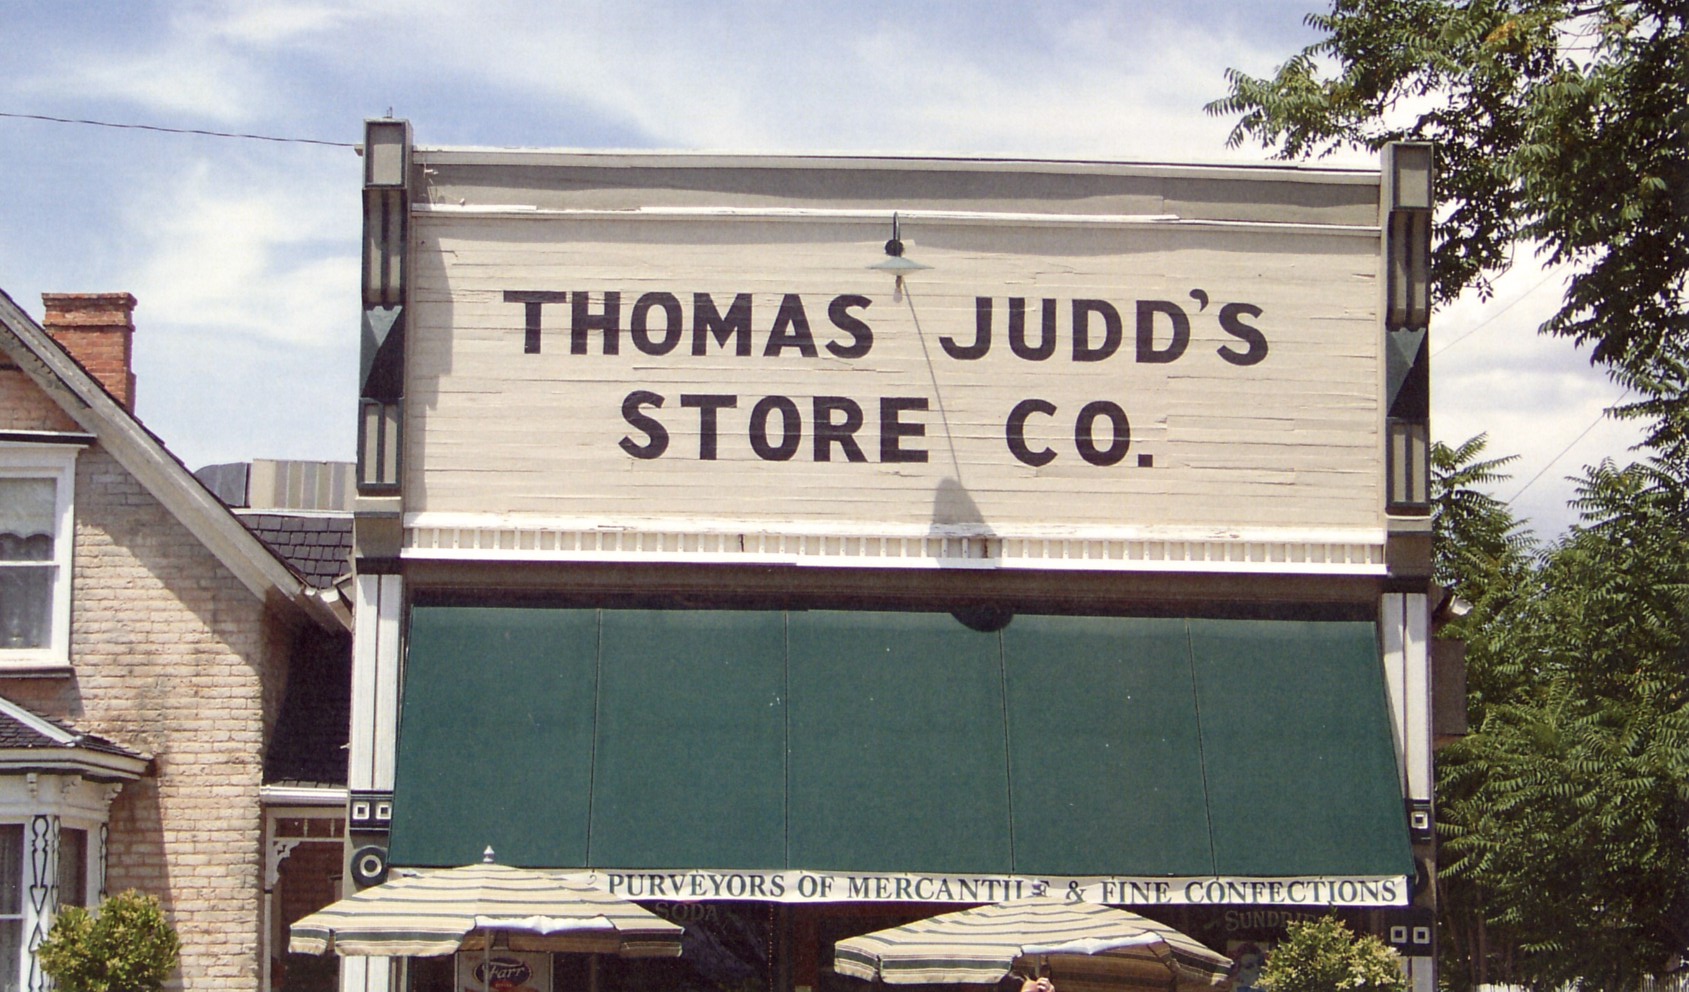 WCHS-00581 Upper front of the Thomas Judd's Store